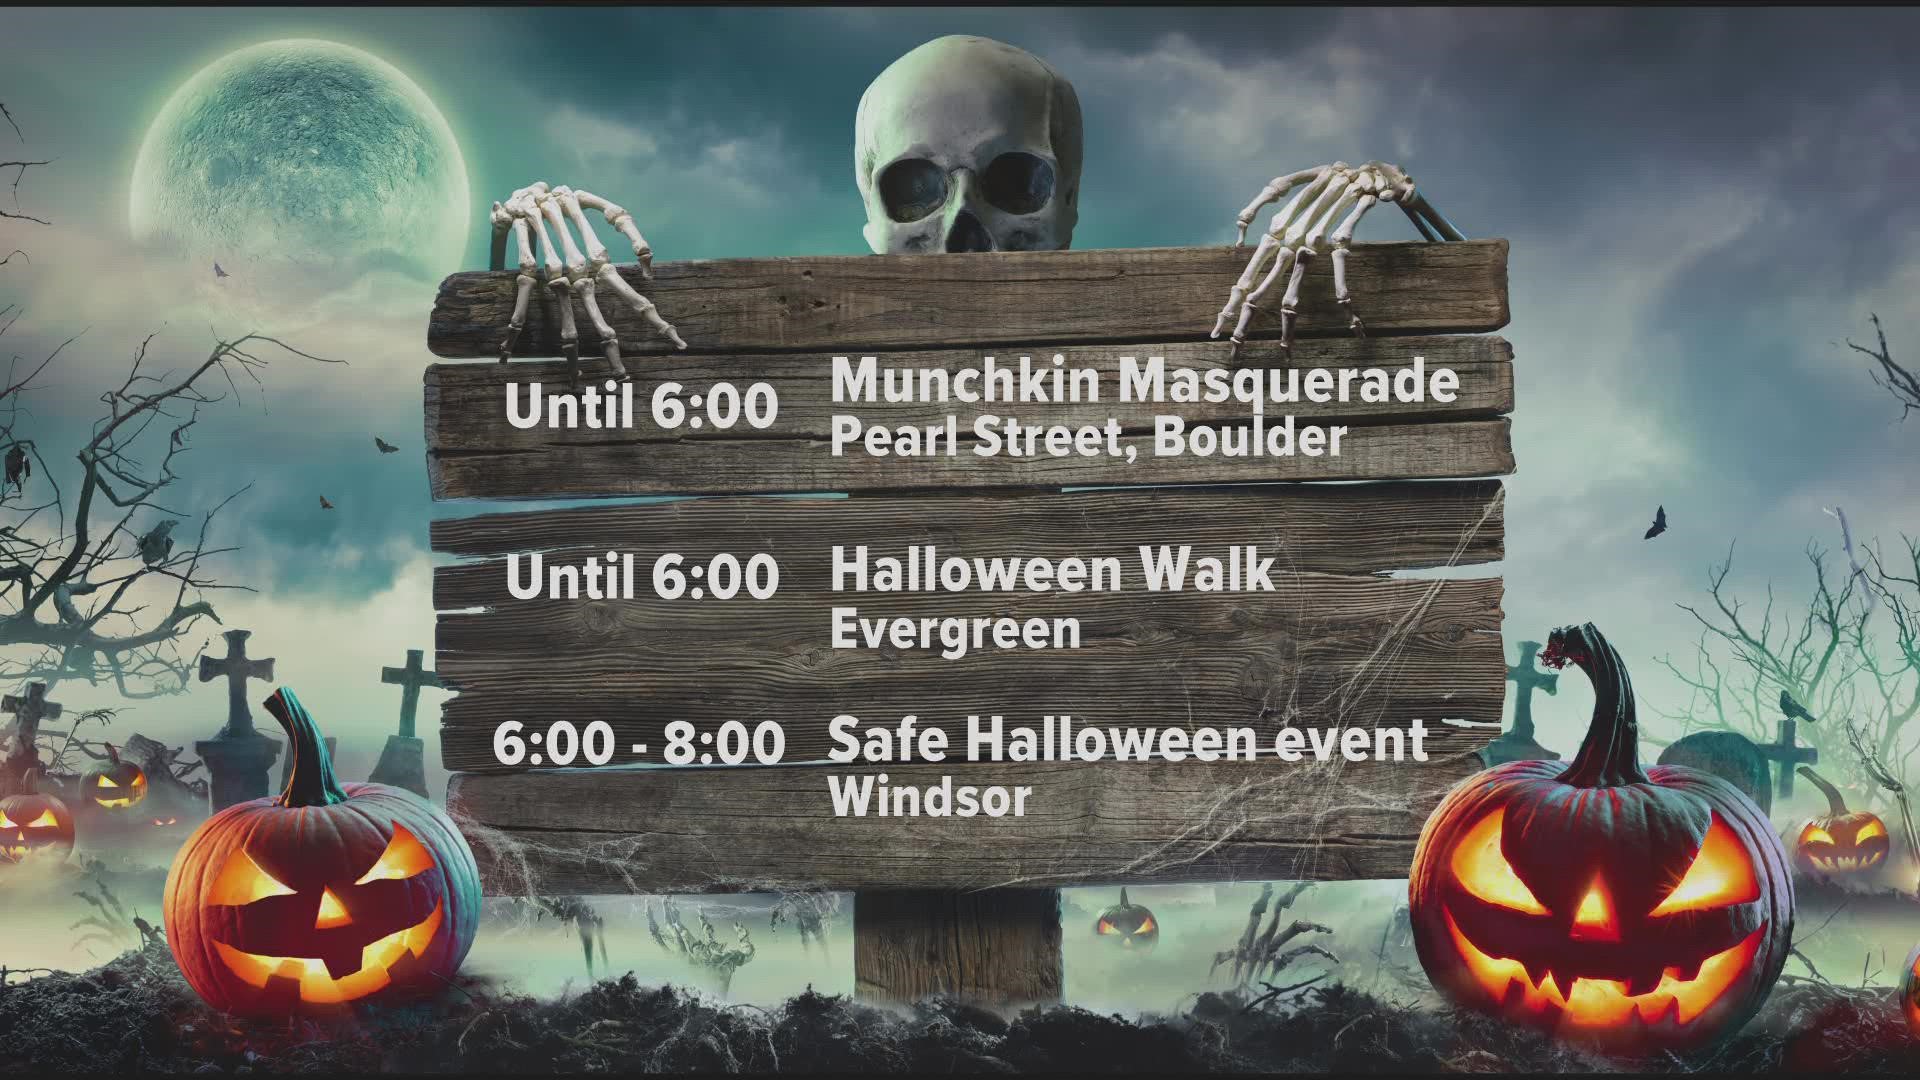 Here are some local Halloween events happening here in Colorado.